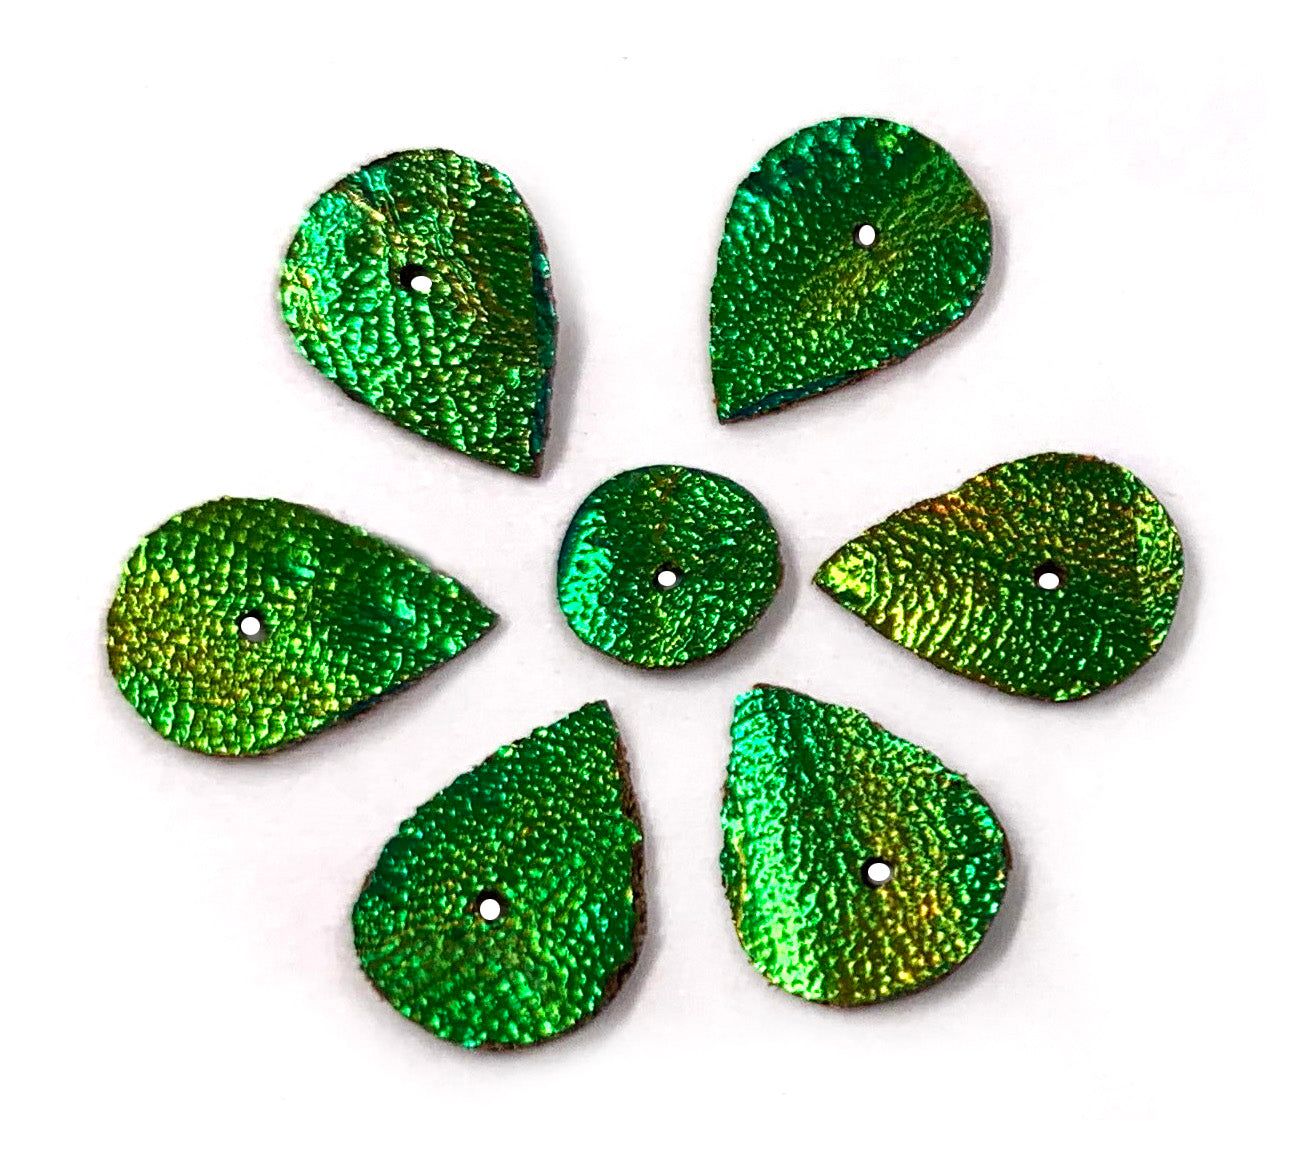 Jewel Beetle Wings UNDRILLED NO-HOLE 100 Pcs Natural Wings - RAINDROP 1 CM x 0.5 CM